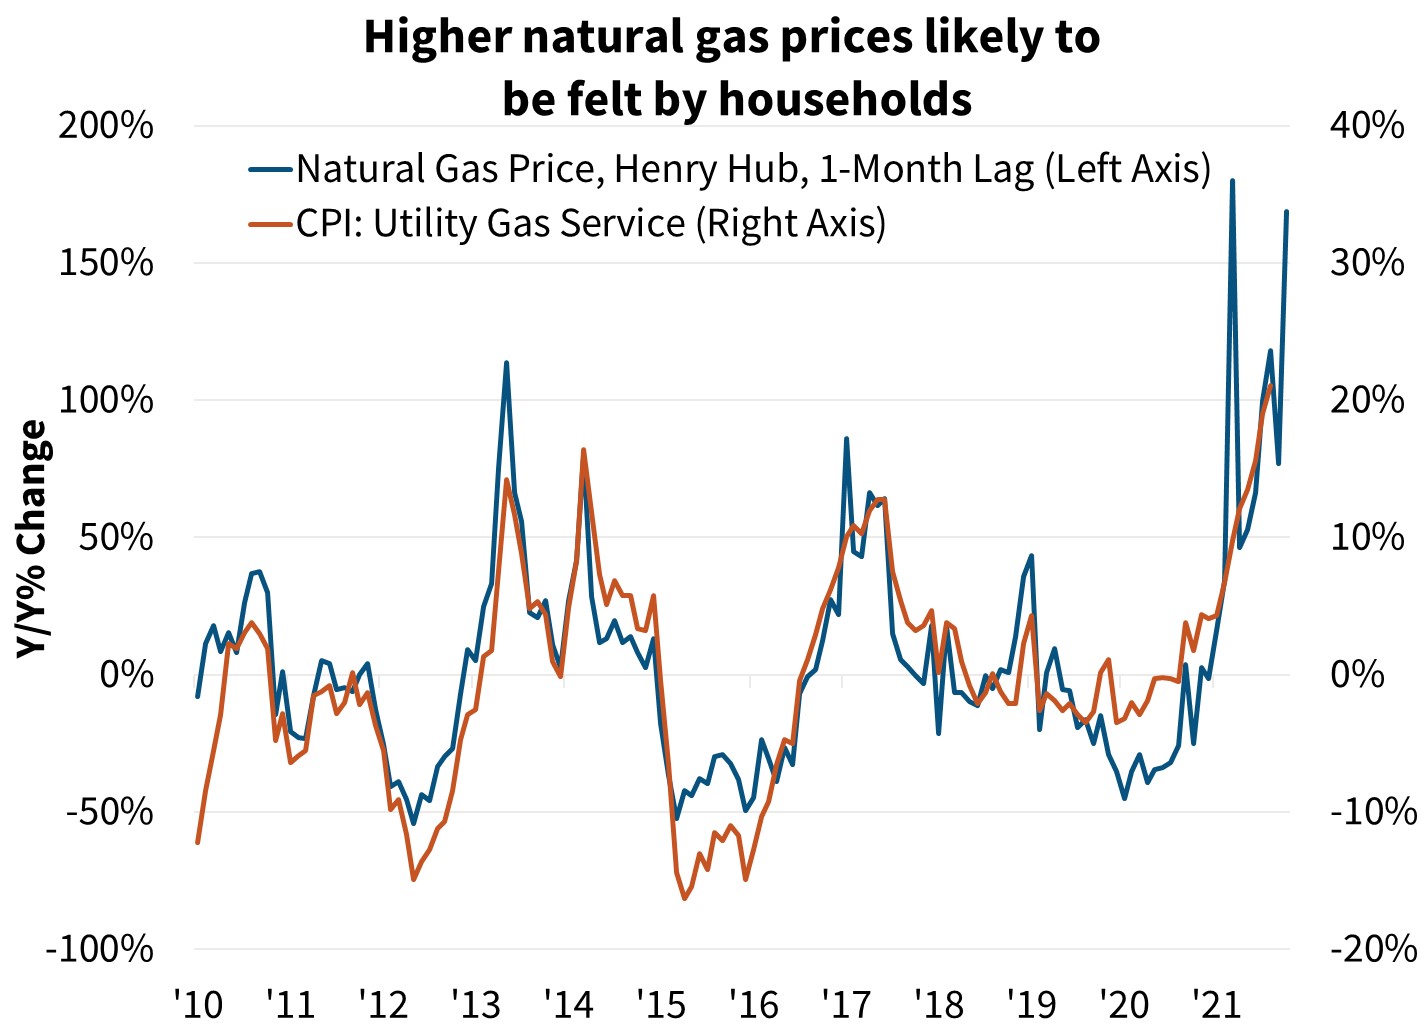  Higher natural gas prices likely to be felt by households